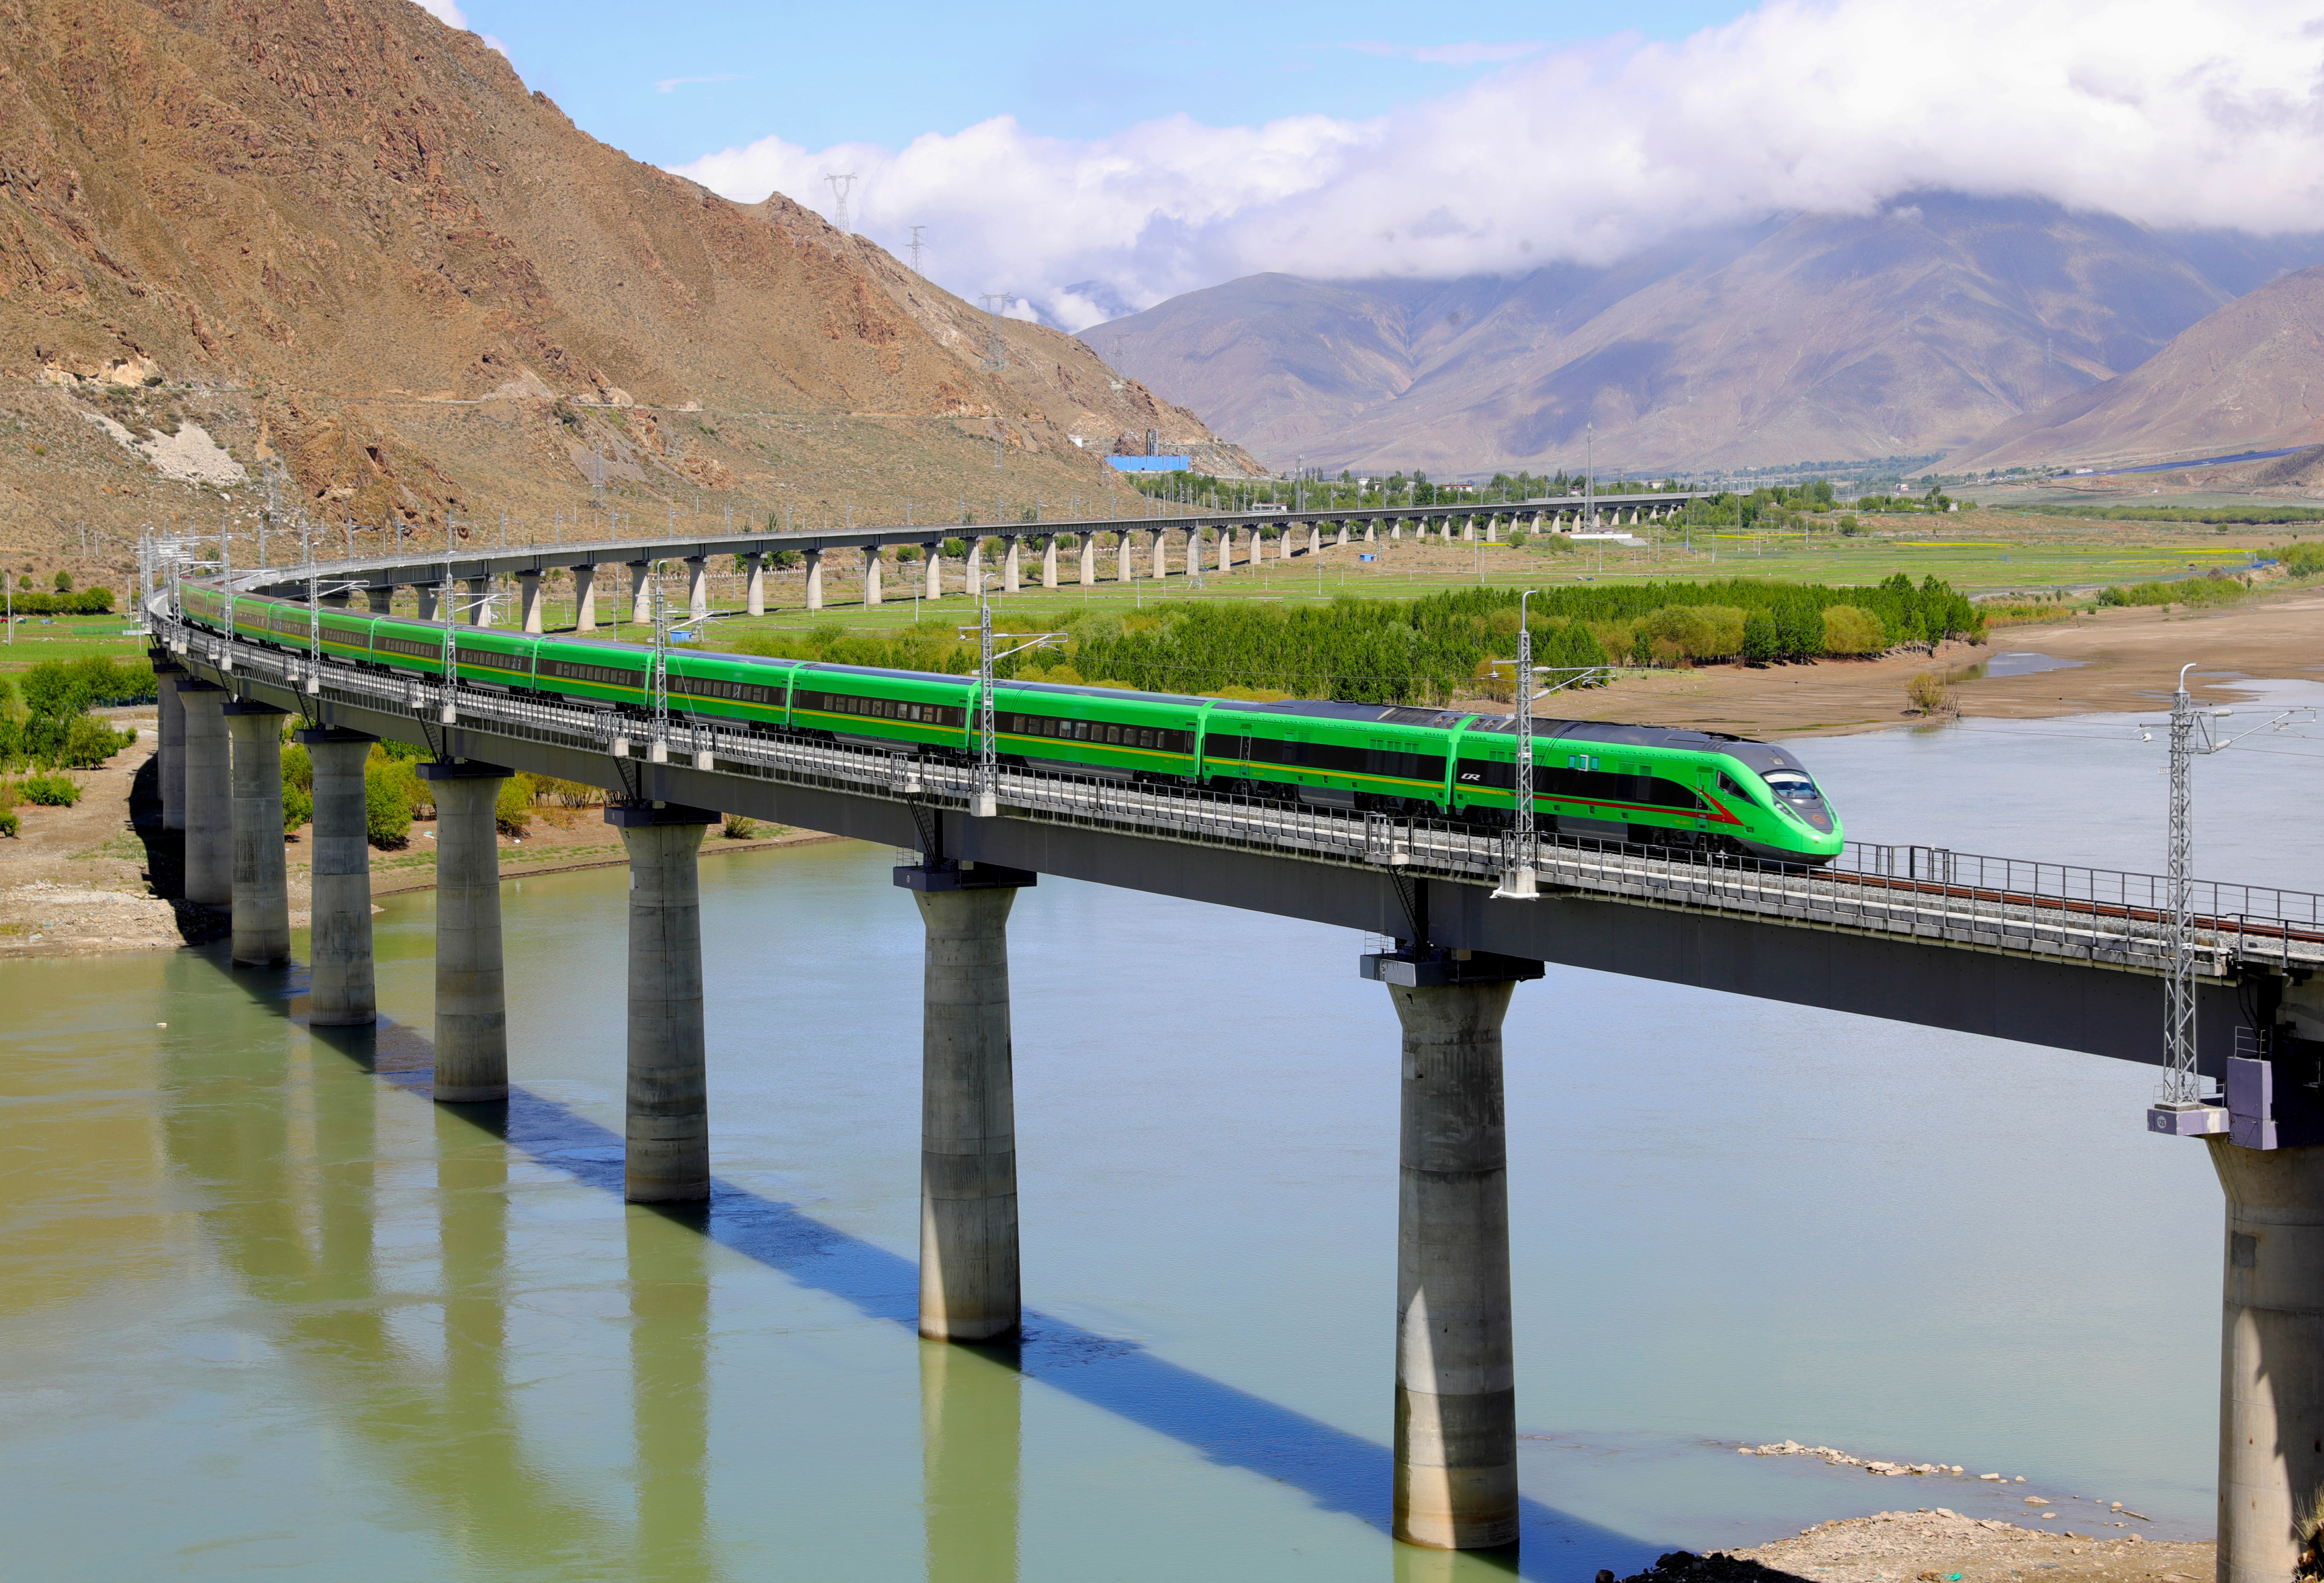 Tibet plans to complete building 4,000km (2,485 miles) of railway lines by 2025. Photo: Xinhua